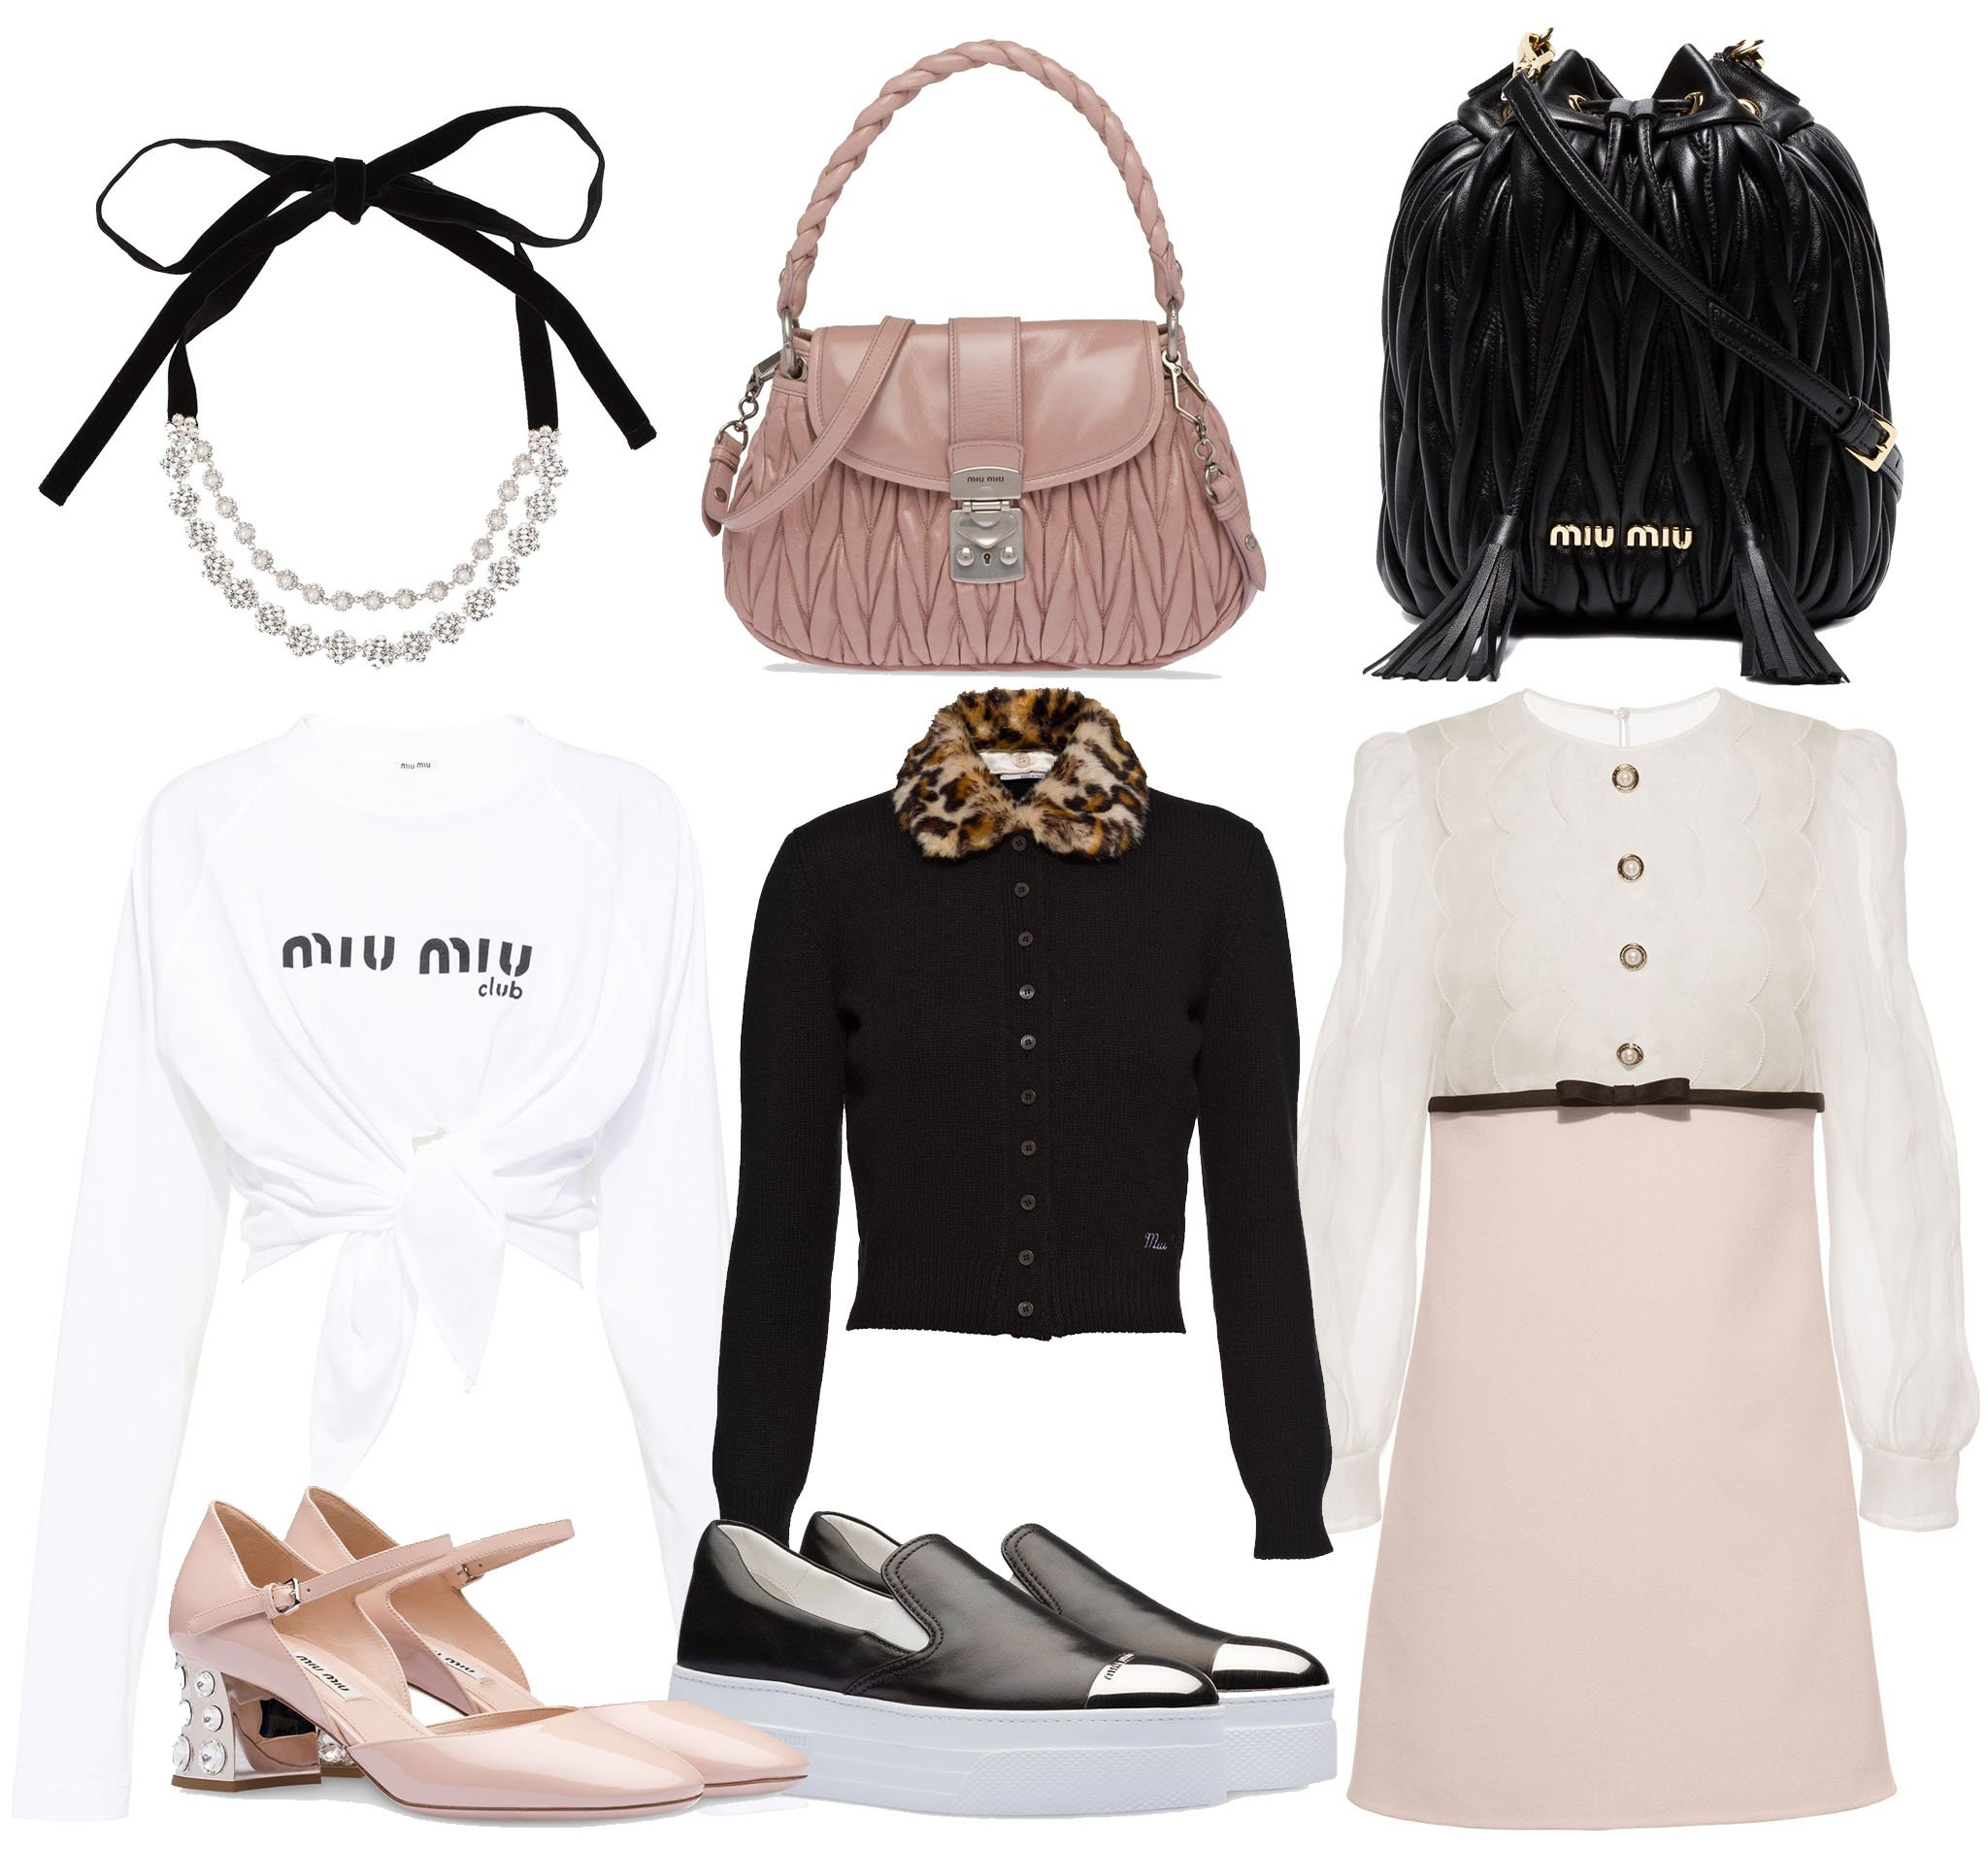 Unlike Prada, which is known for its sophisticated designs, Miu Miu's fashion pieces are more on the girly end